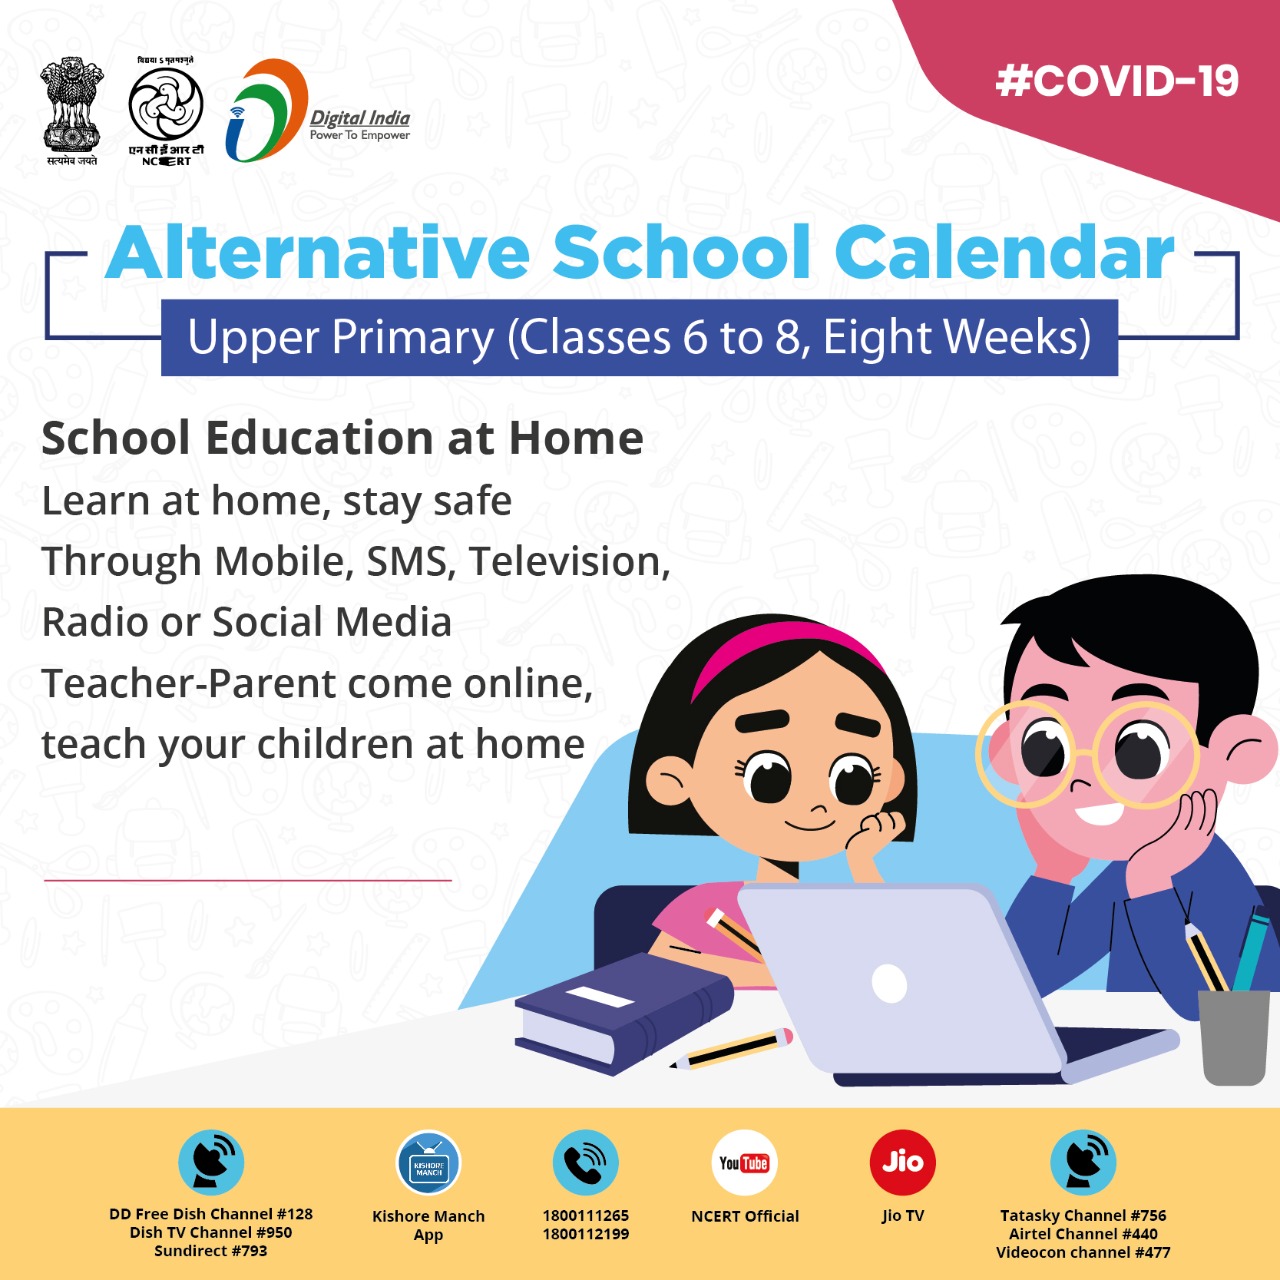 Alternative Academic Calendar for upper primary stage  Launched by Dr Ramesh Pokhriyal Nishank